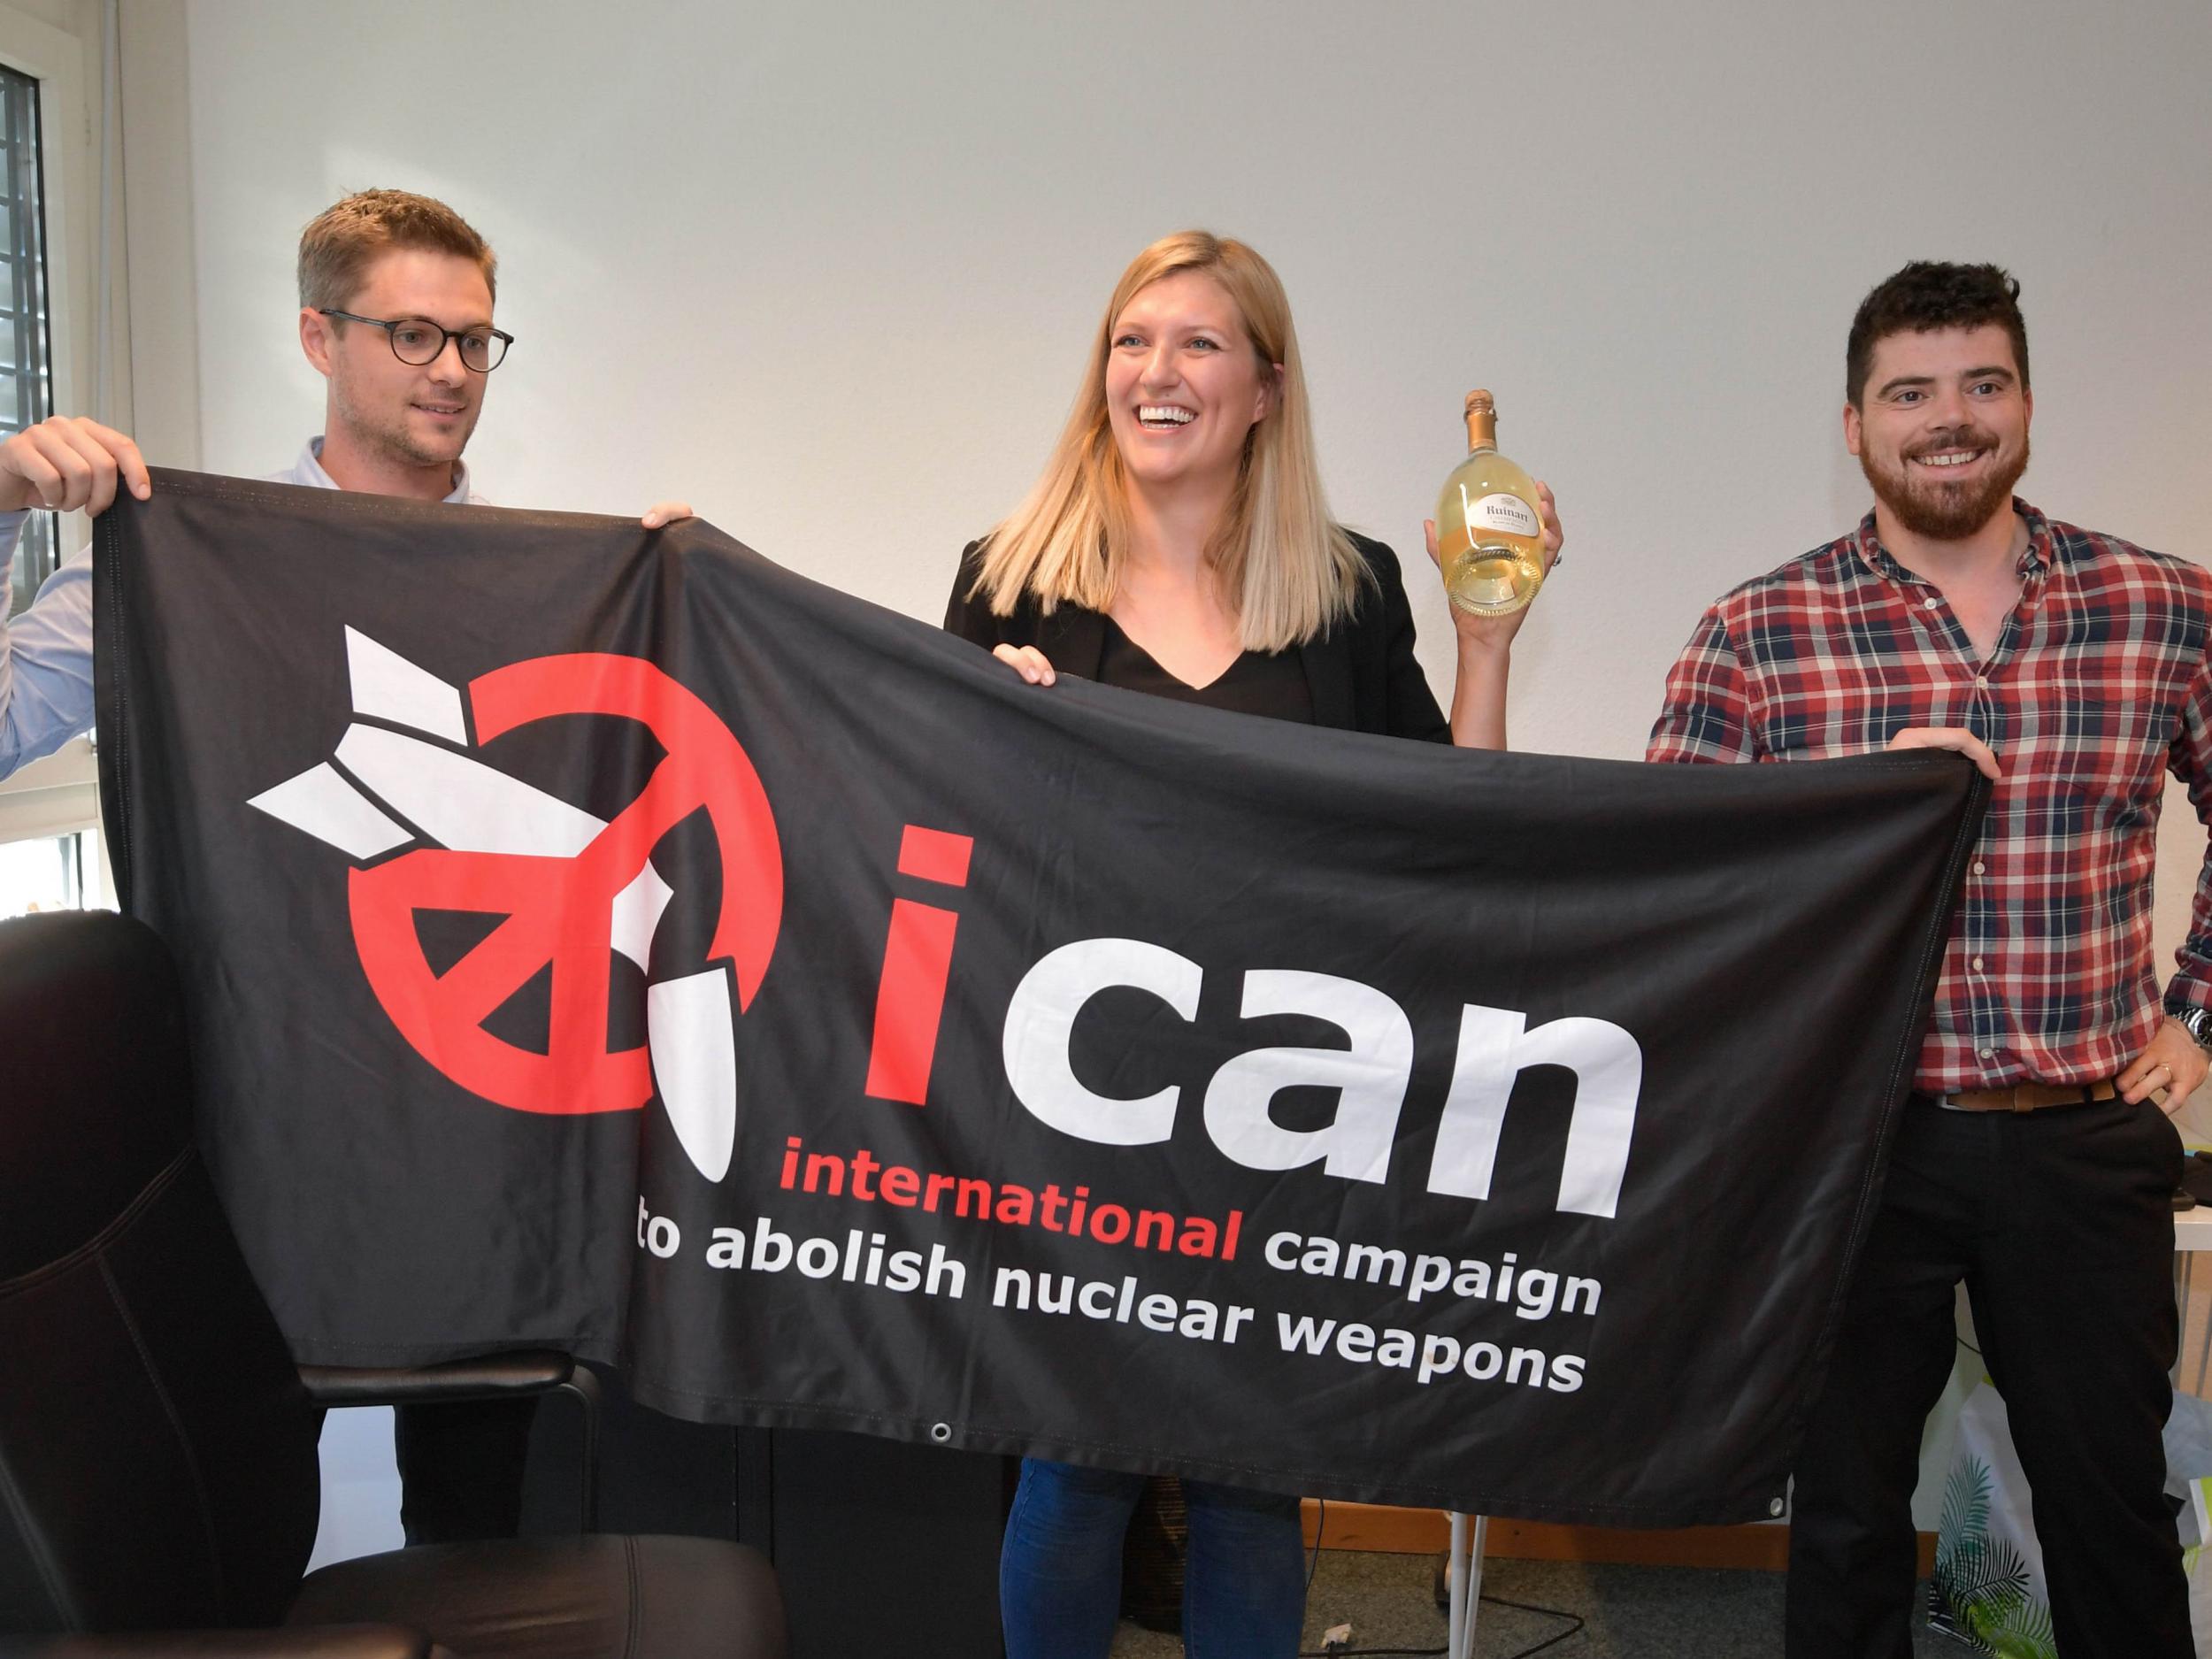 Members of the International Campaign to Abolish Nuclear Weapons (ICAN) after winning the Nobel Peace Prize on 6 October